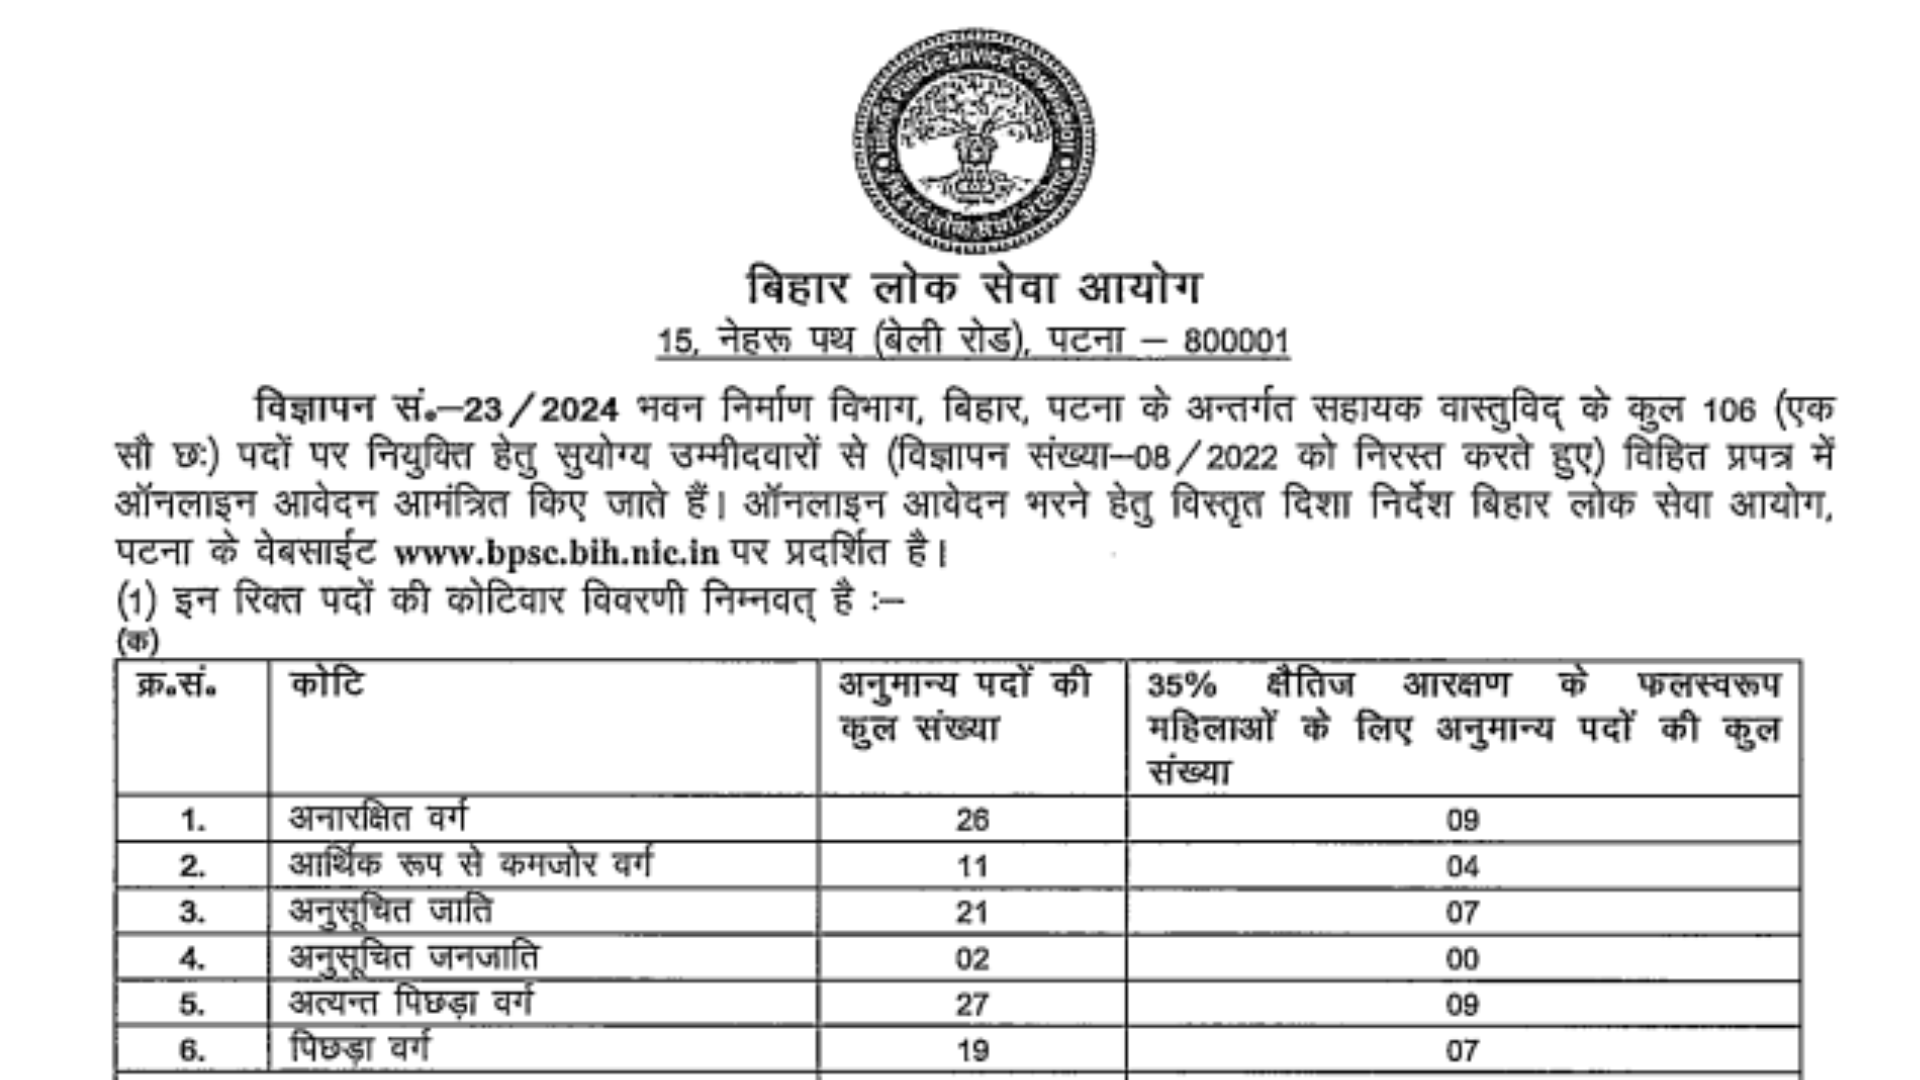 BPSC Assistant Architect Recruitment 2024 Notification Out for 106 Posts, Apply Online